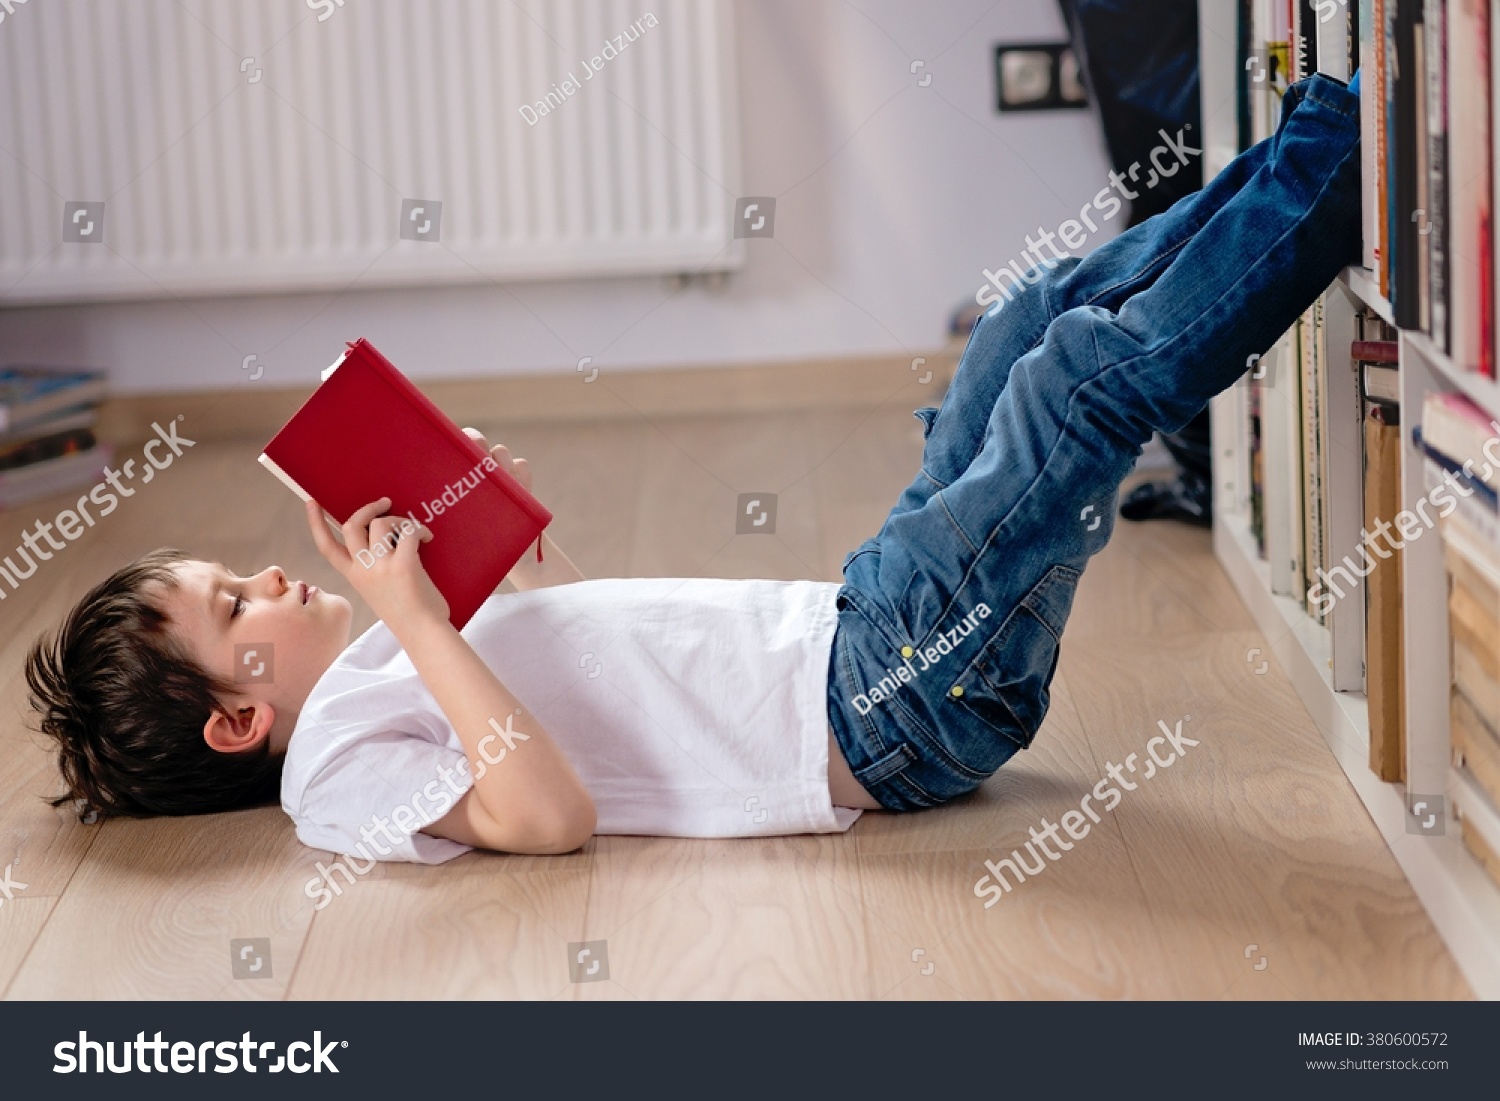 Little boy child reading a book in the library. He lies on the floor. Legs on bookshelf #380600572